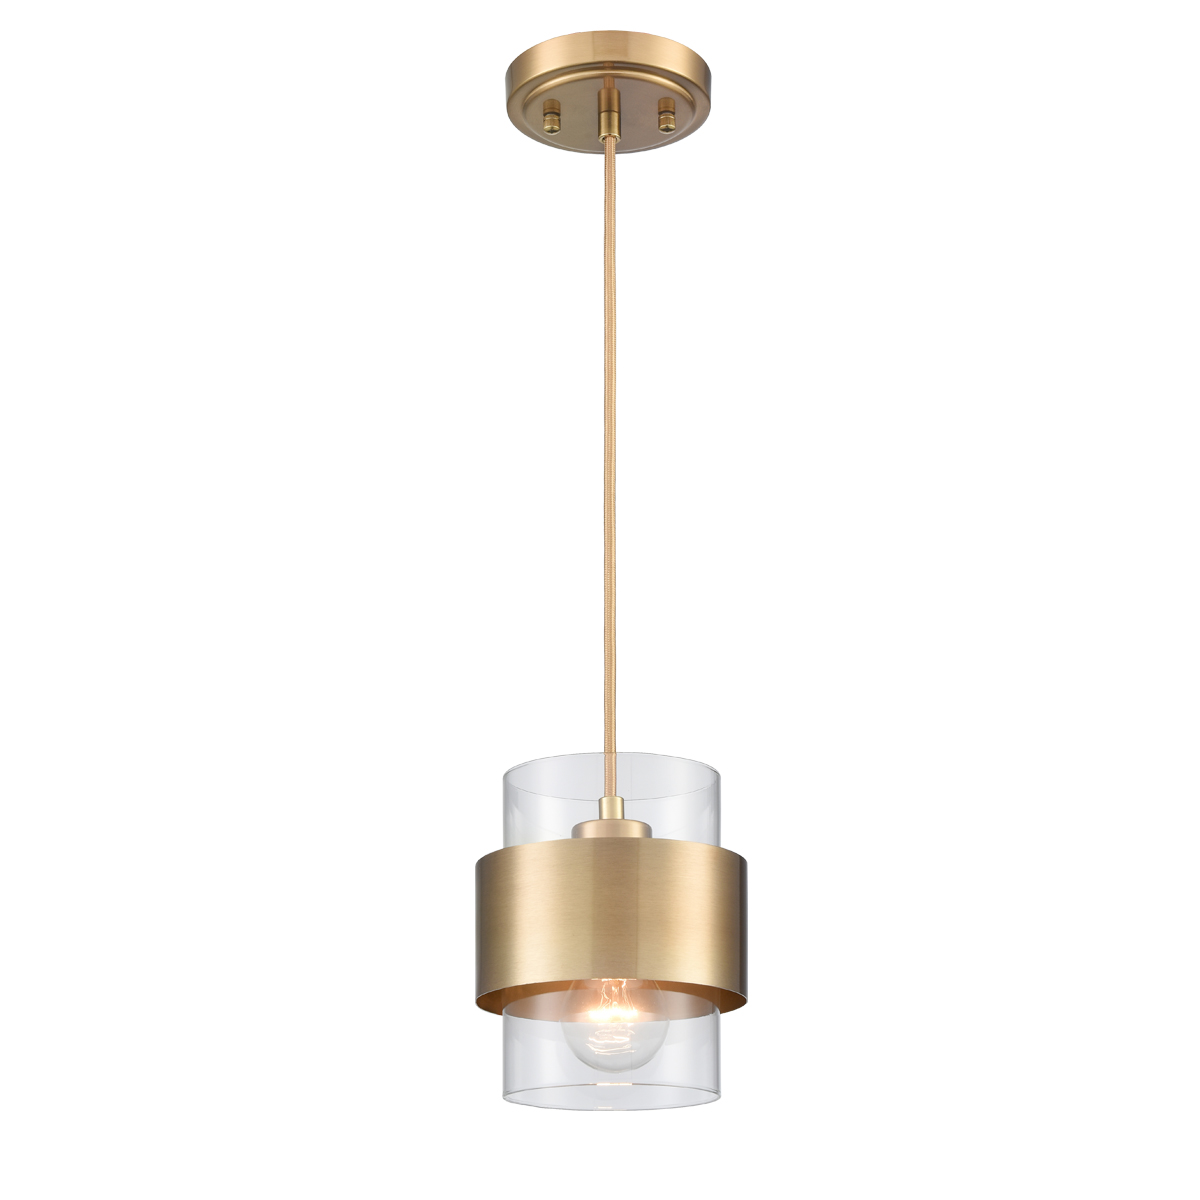 Modern Pendant Light Fixtures Over Kitchen Island Lighting Ceiling Hanging Farmhouse Metal Industrial Mini Cylinder Pendant Lighting Clear Glass Shade